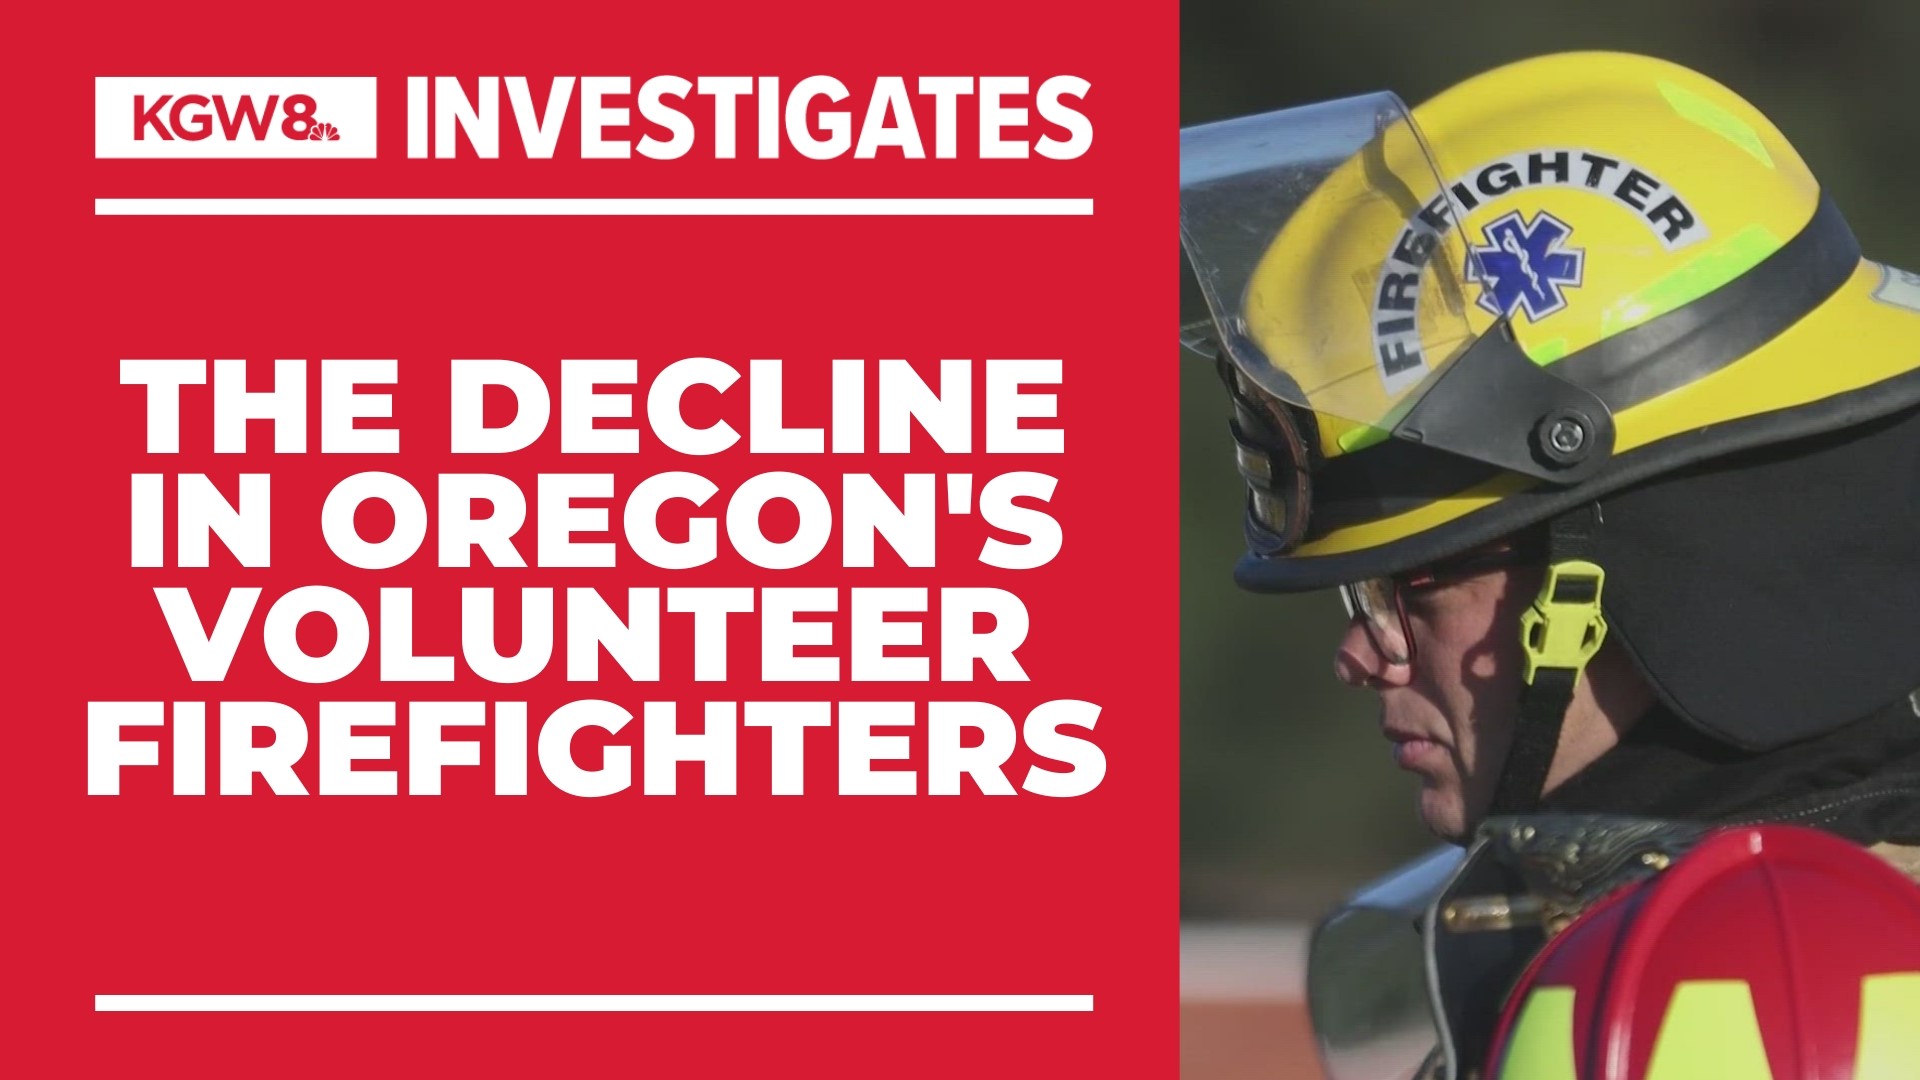 73% of Oregon’s fire departments reported a "moderate or significant decrease" in the number of volunteer firefighters over the past five years.